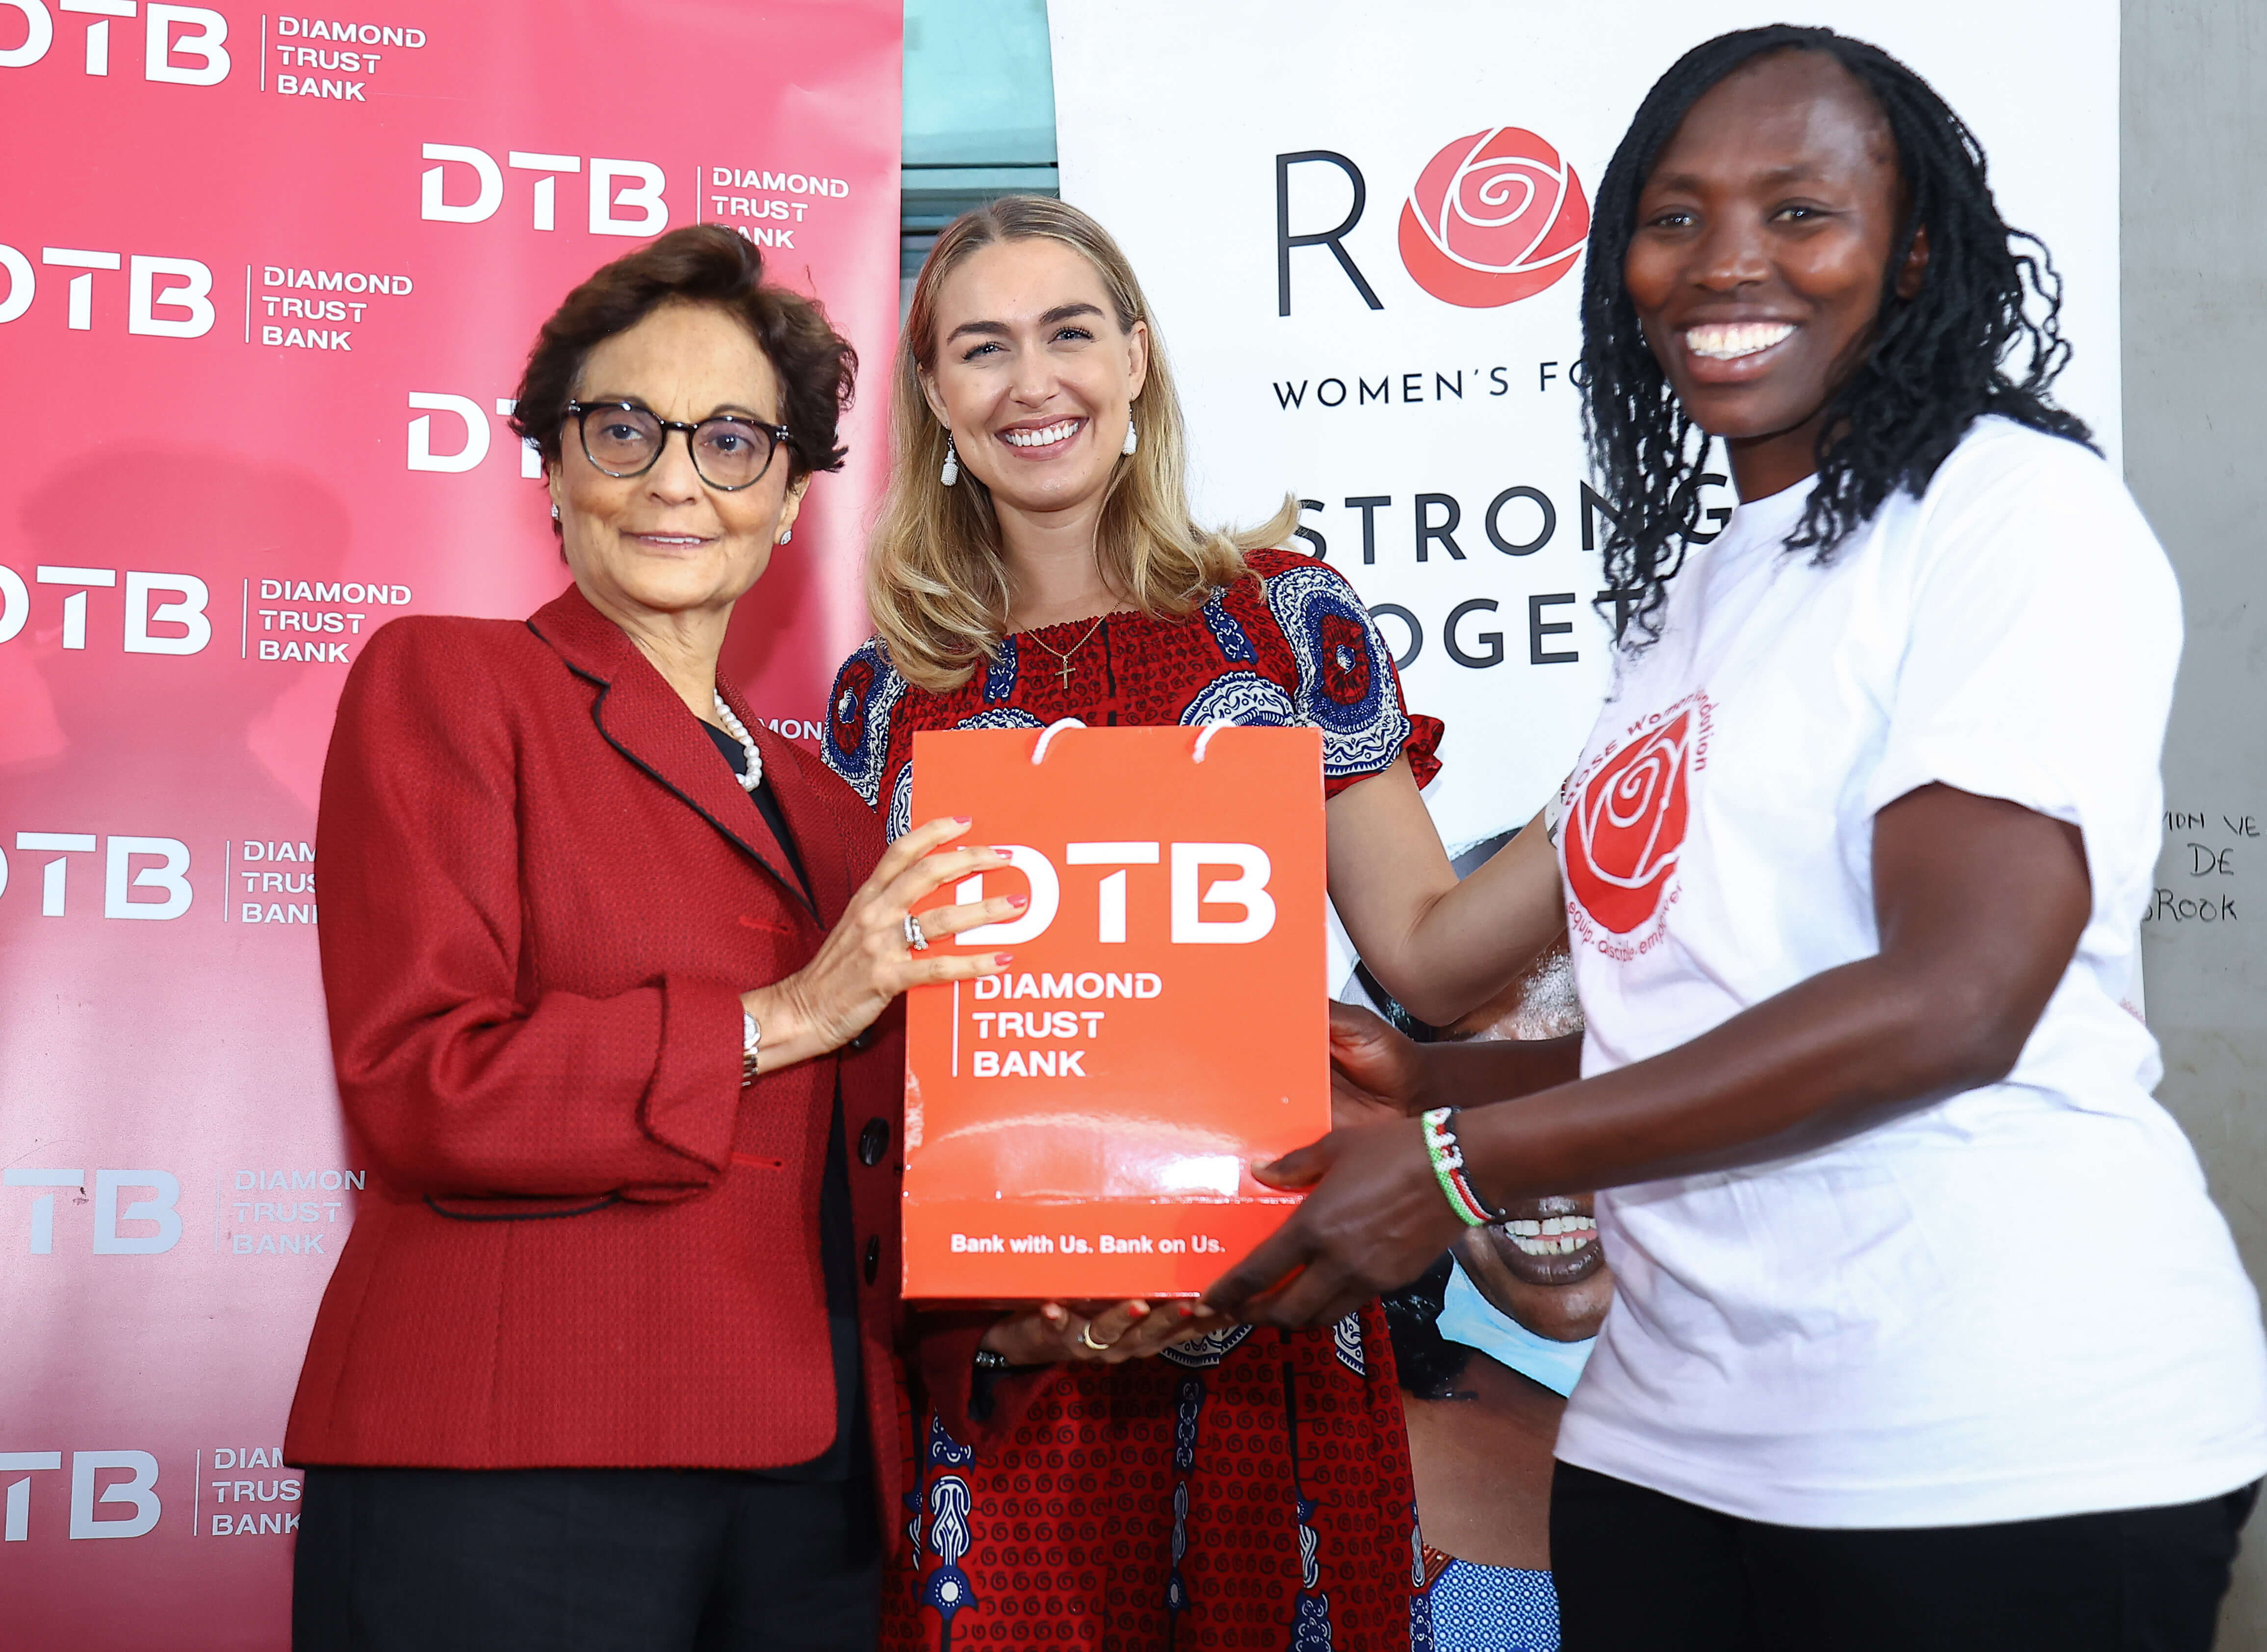 DTB partners with Rose Women’s Foundation to promote financial inclusion